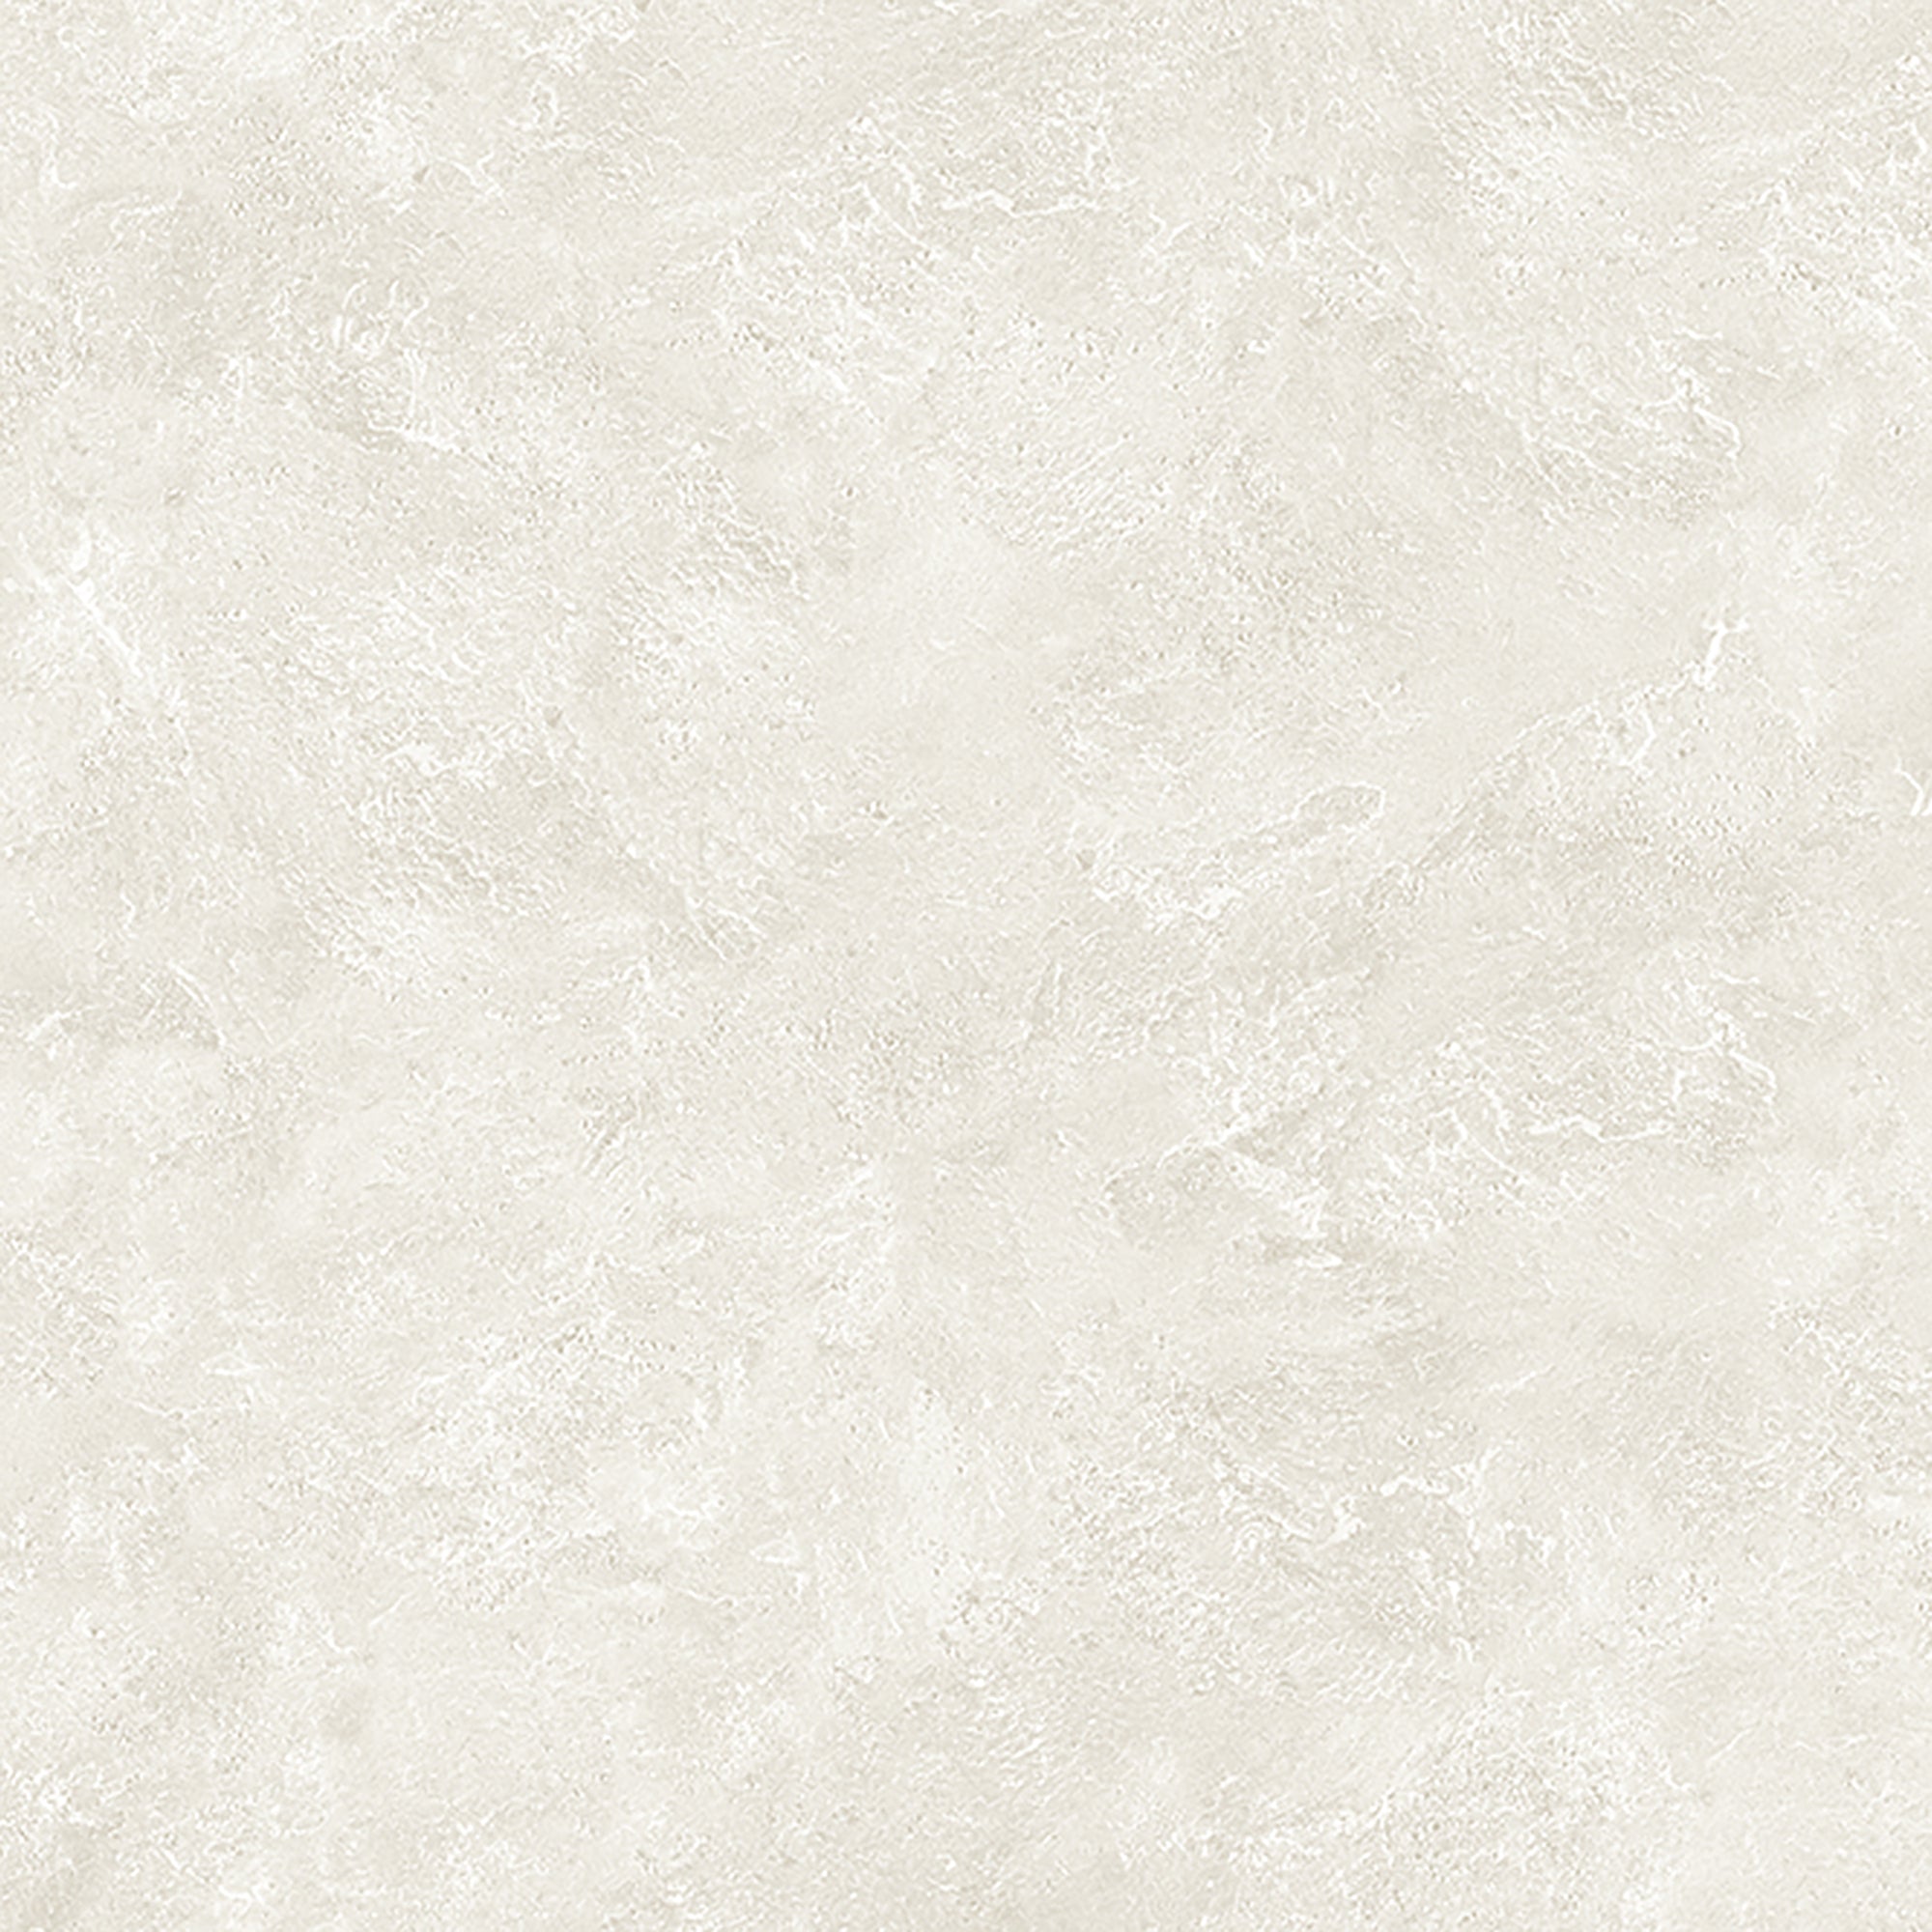 Surface Neutral - 34519-2